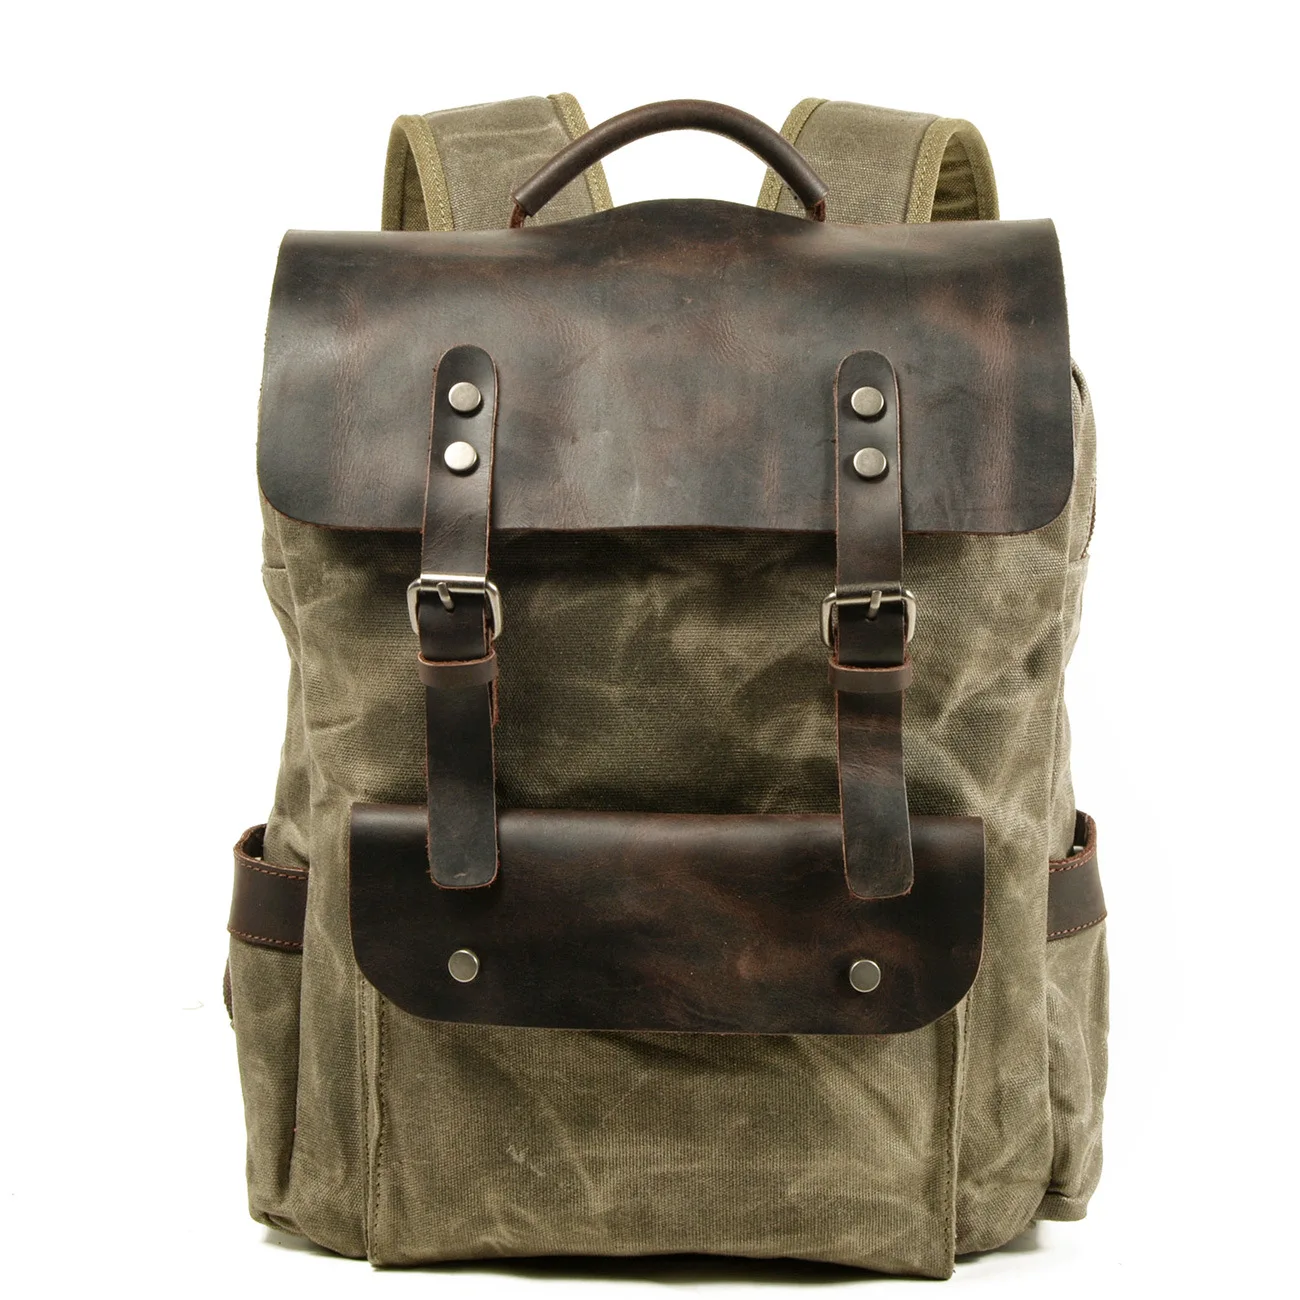 Muchuan Outdoor Laptop Backpack Student Waterproof Bag Cotton Waxed Canvas with Top Layer Crazy Horse Leather Backpack